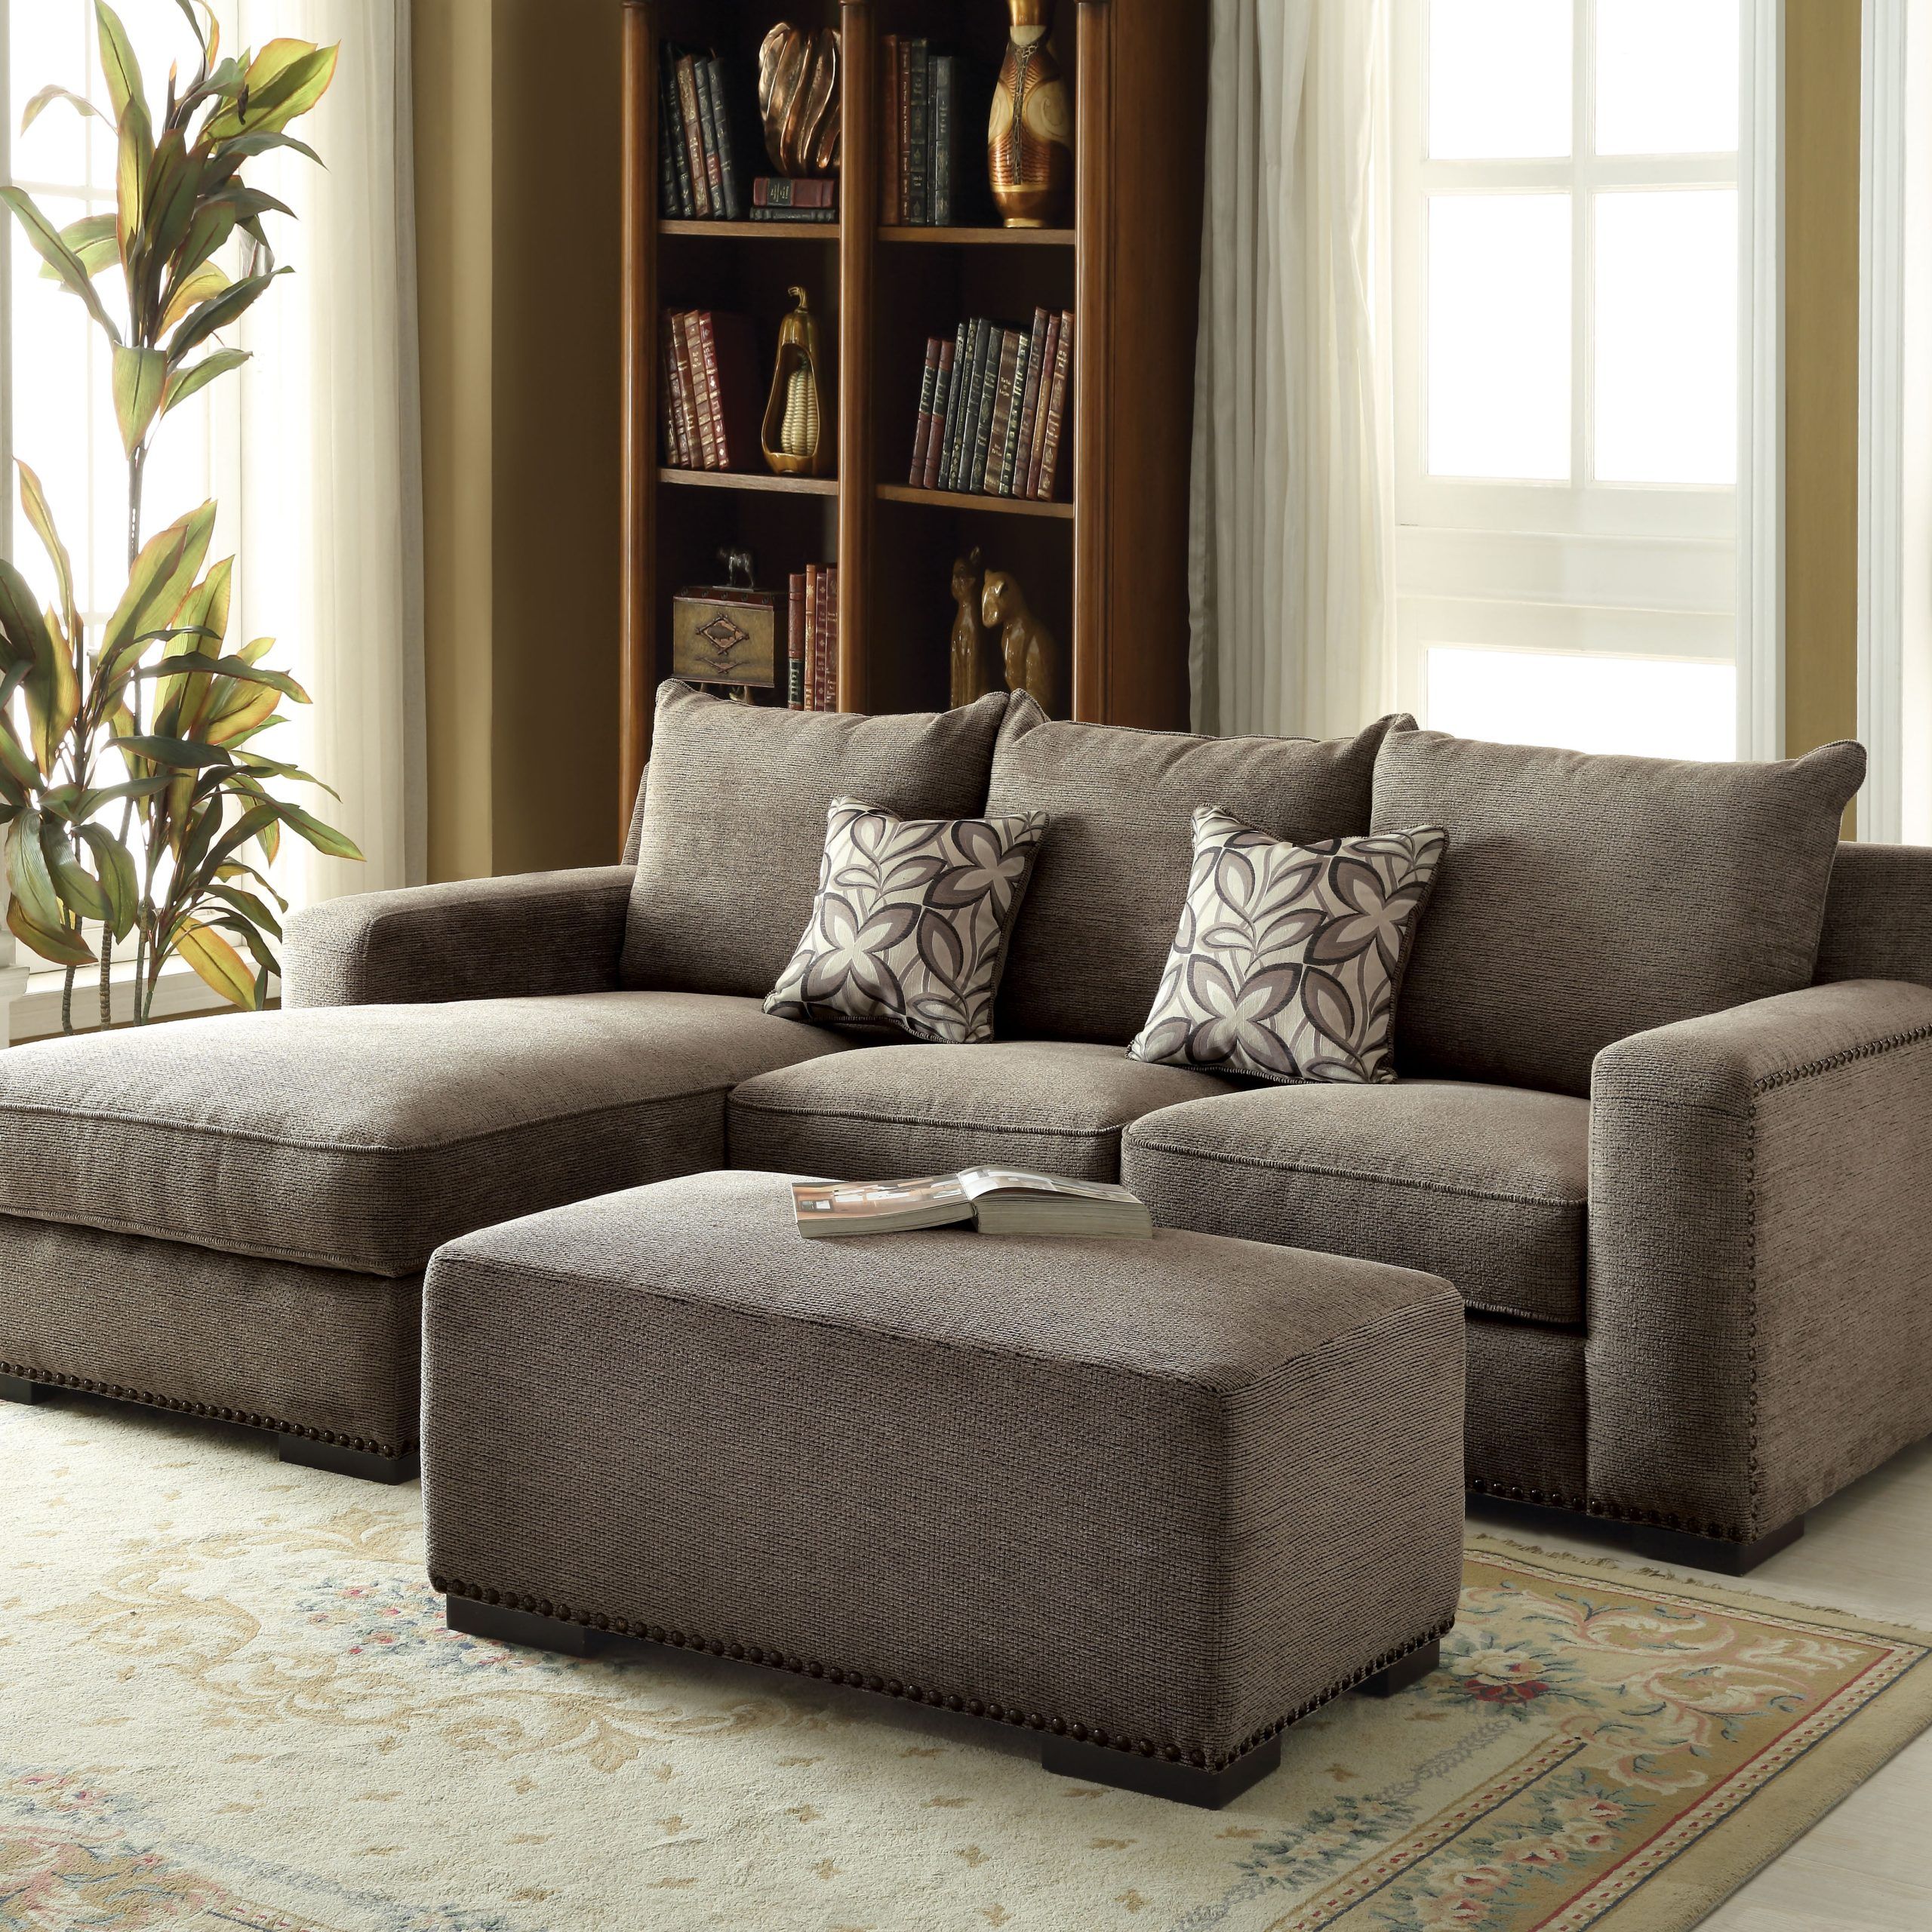 Acme Ushury Sectional Sofa With 2 Pillows , Gray Chenille – Walmart Within Chenille Sectional Sofas (View 13 of 20)